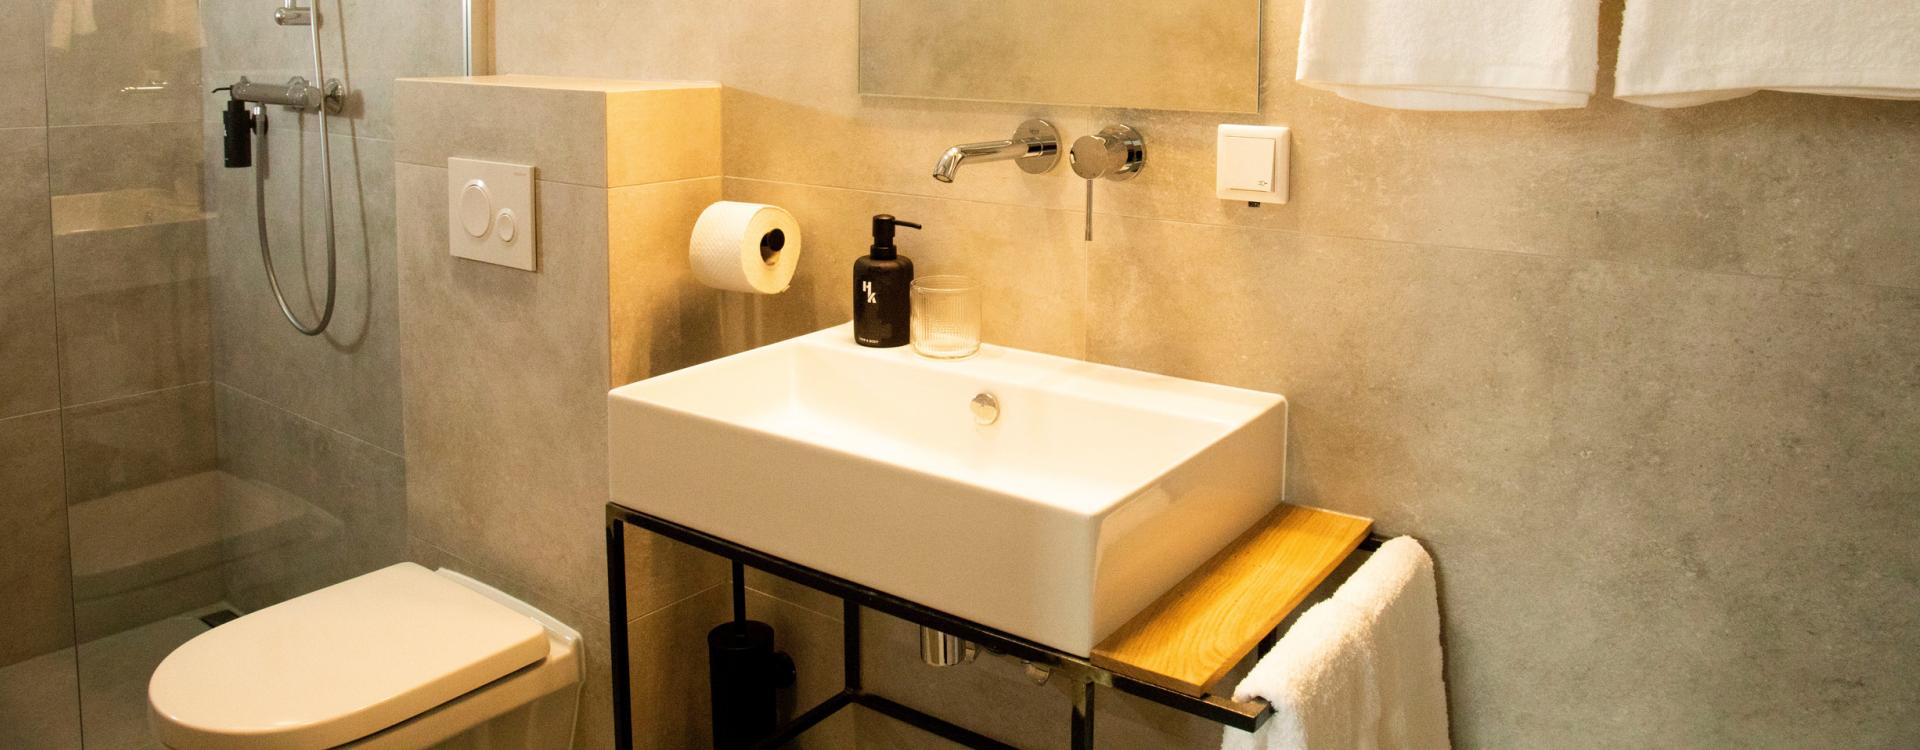 A modern bathroom with big grey tiles, a square sink, a toilet and white towels